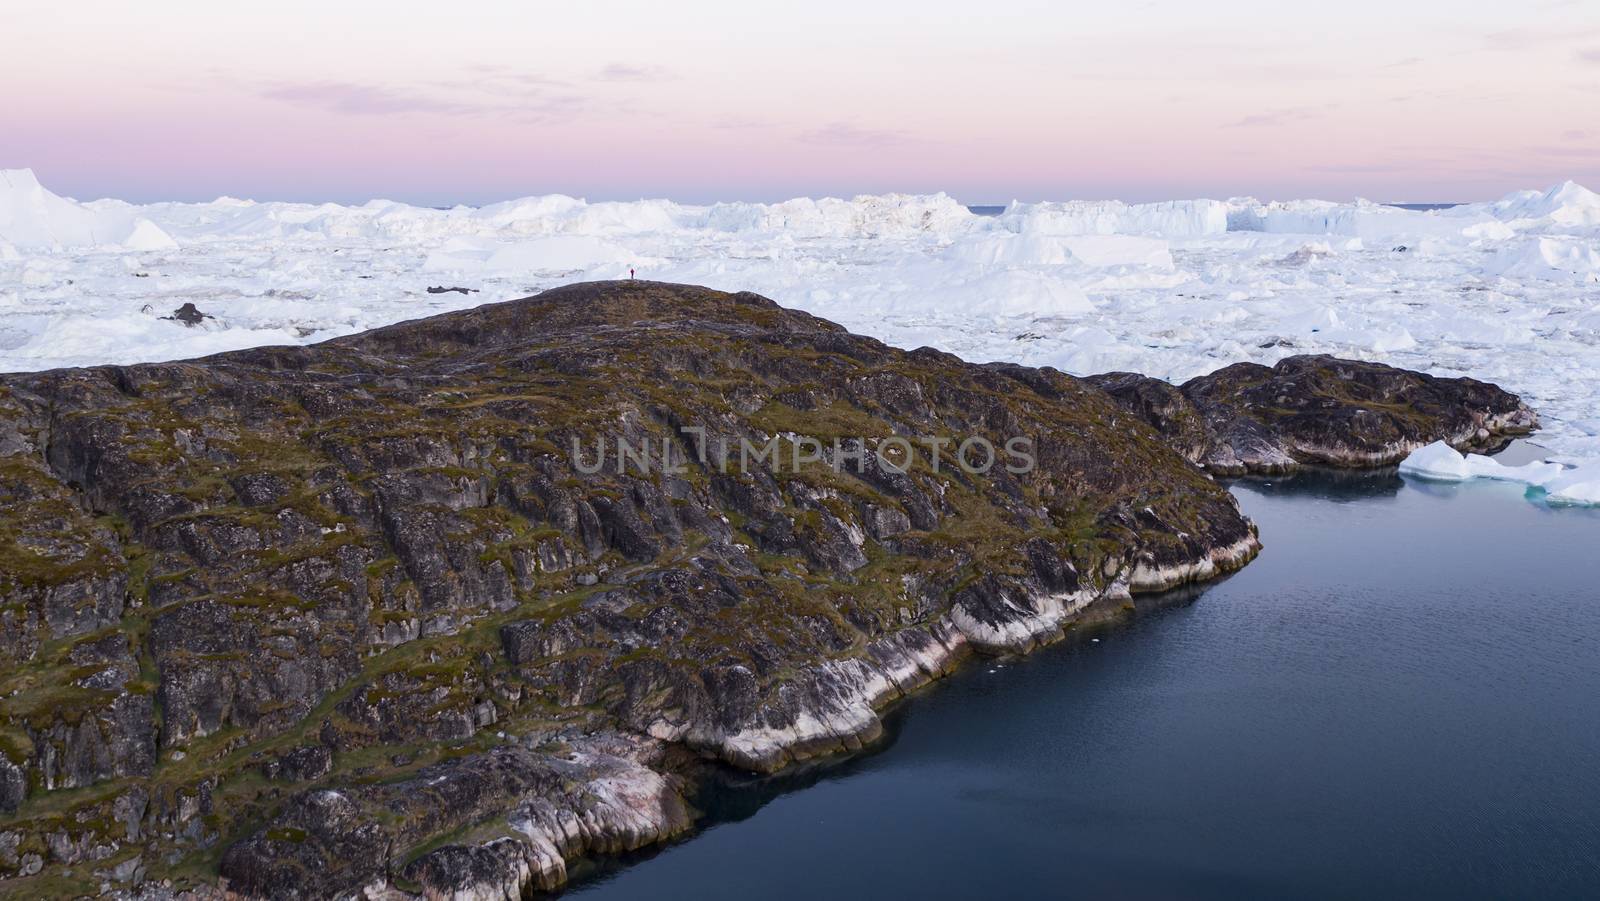 Arctic landscape nature with icebergs and ice in Greenland icefjord. Aerial drone image of ice and iceberg. Ilulissat Icefjord with icebergs from Jakobshavn Glacier aka Sermeq Kujalleq glacier by Maridav